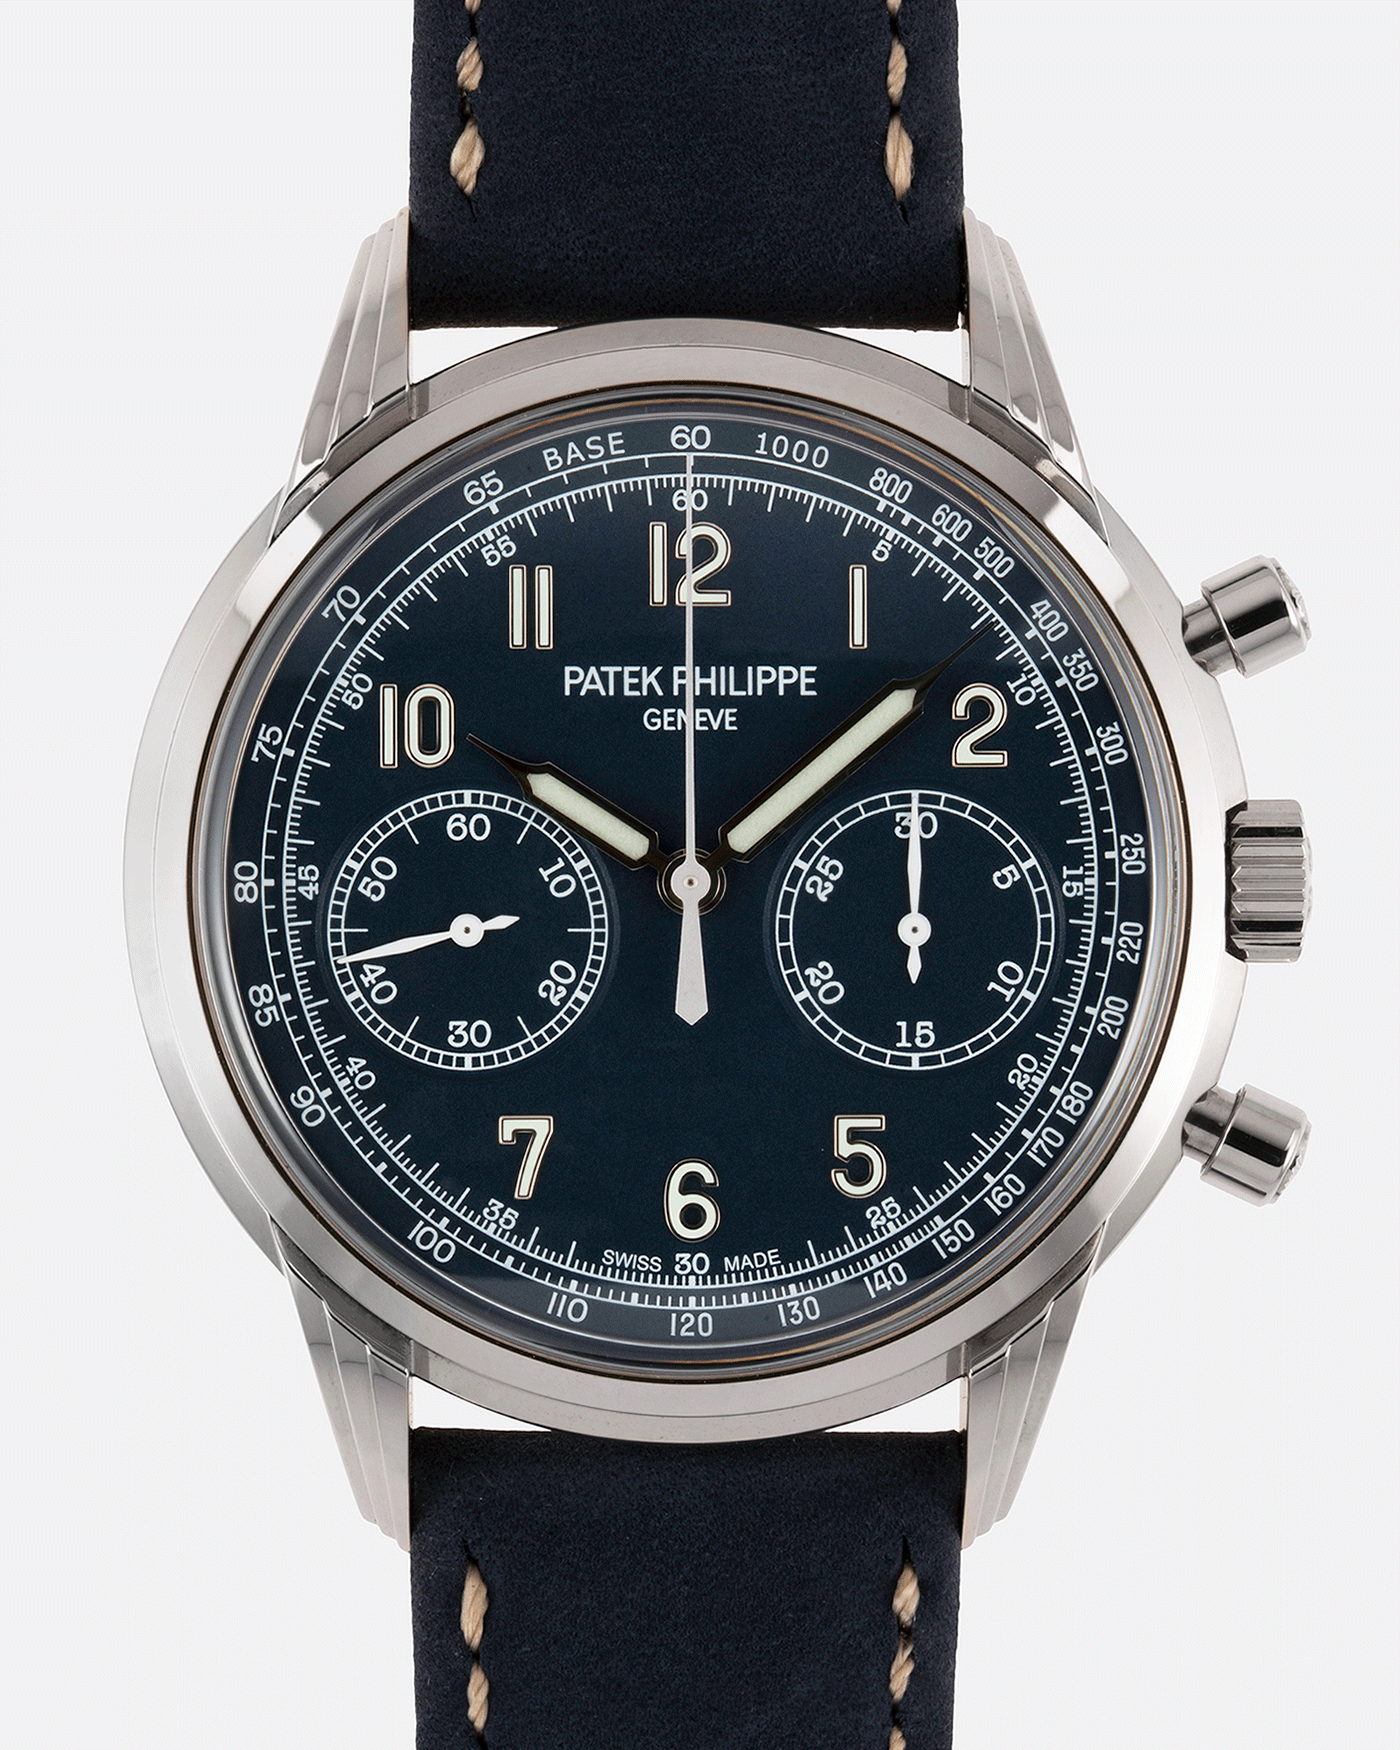 Brand: Patek Philippe Year: 2021 Model: Chronograph Reference Number: 5172G Material: White Gold Movement: In-House Caliber CH 29-535 PS Case Diameter: 41mm Bracelet: Patek Philippe Navy Blue Calfskin Strap with White Gold Deployant Clasp